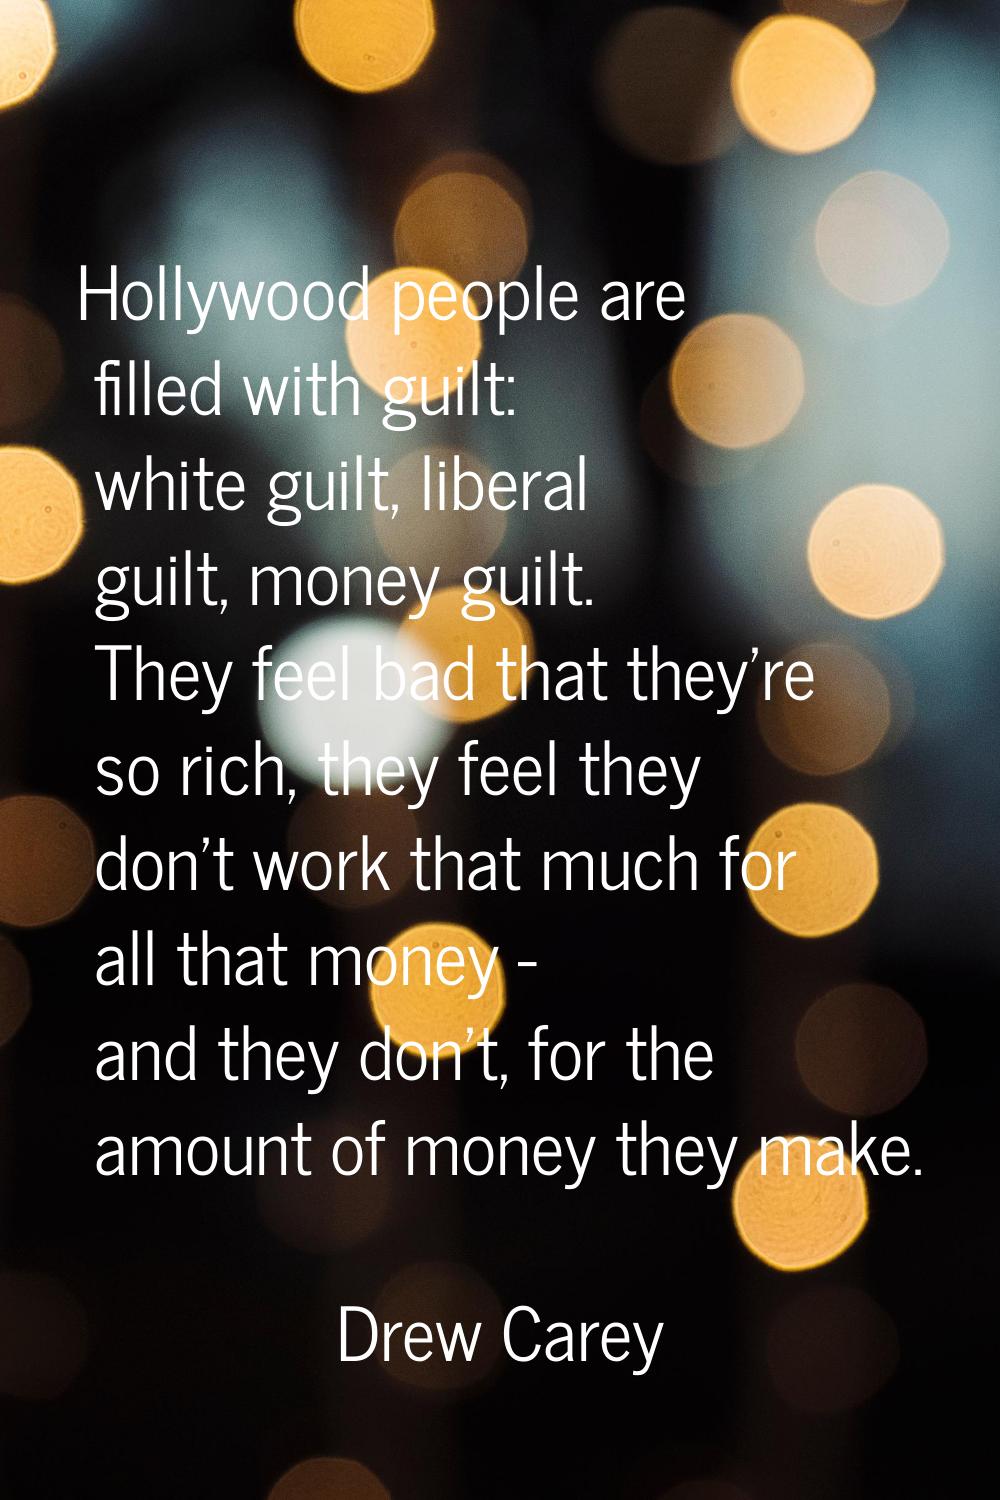 Hollywood people are filled with guilt: white guilt, liberal guilt, money guilt. They feel bad that